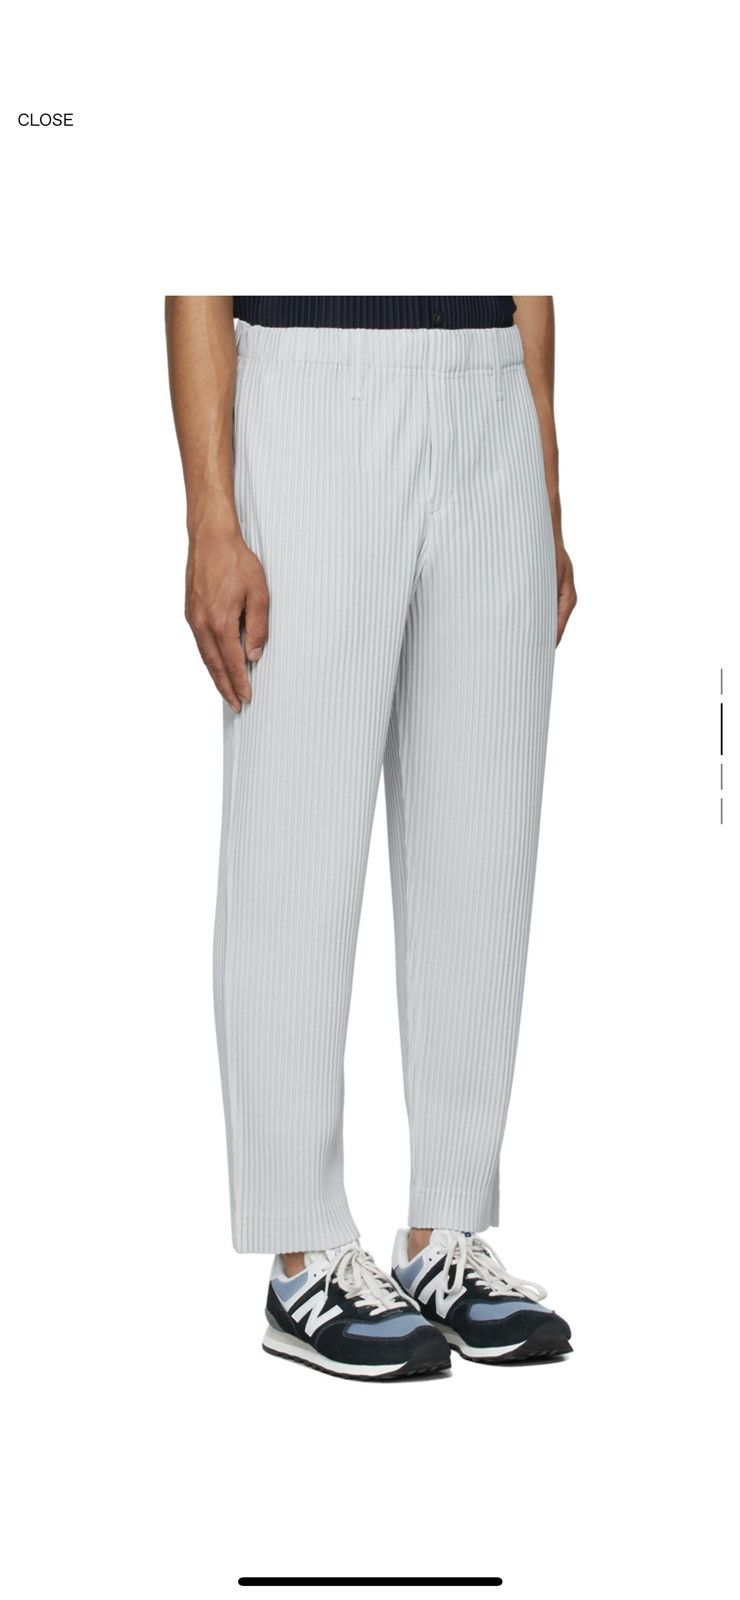 Issey Miyake Issey Miyake Pleated Trousers Size US 30 / EU 46 - 2 Preview